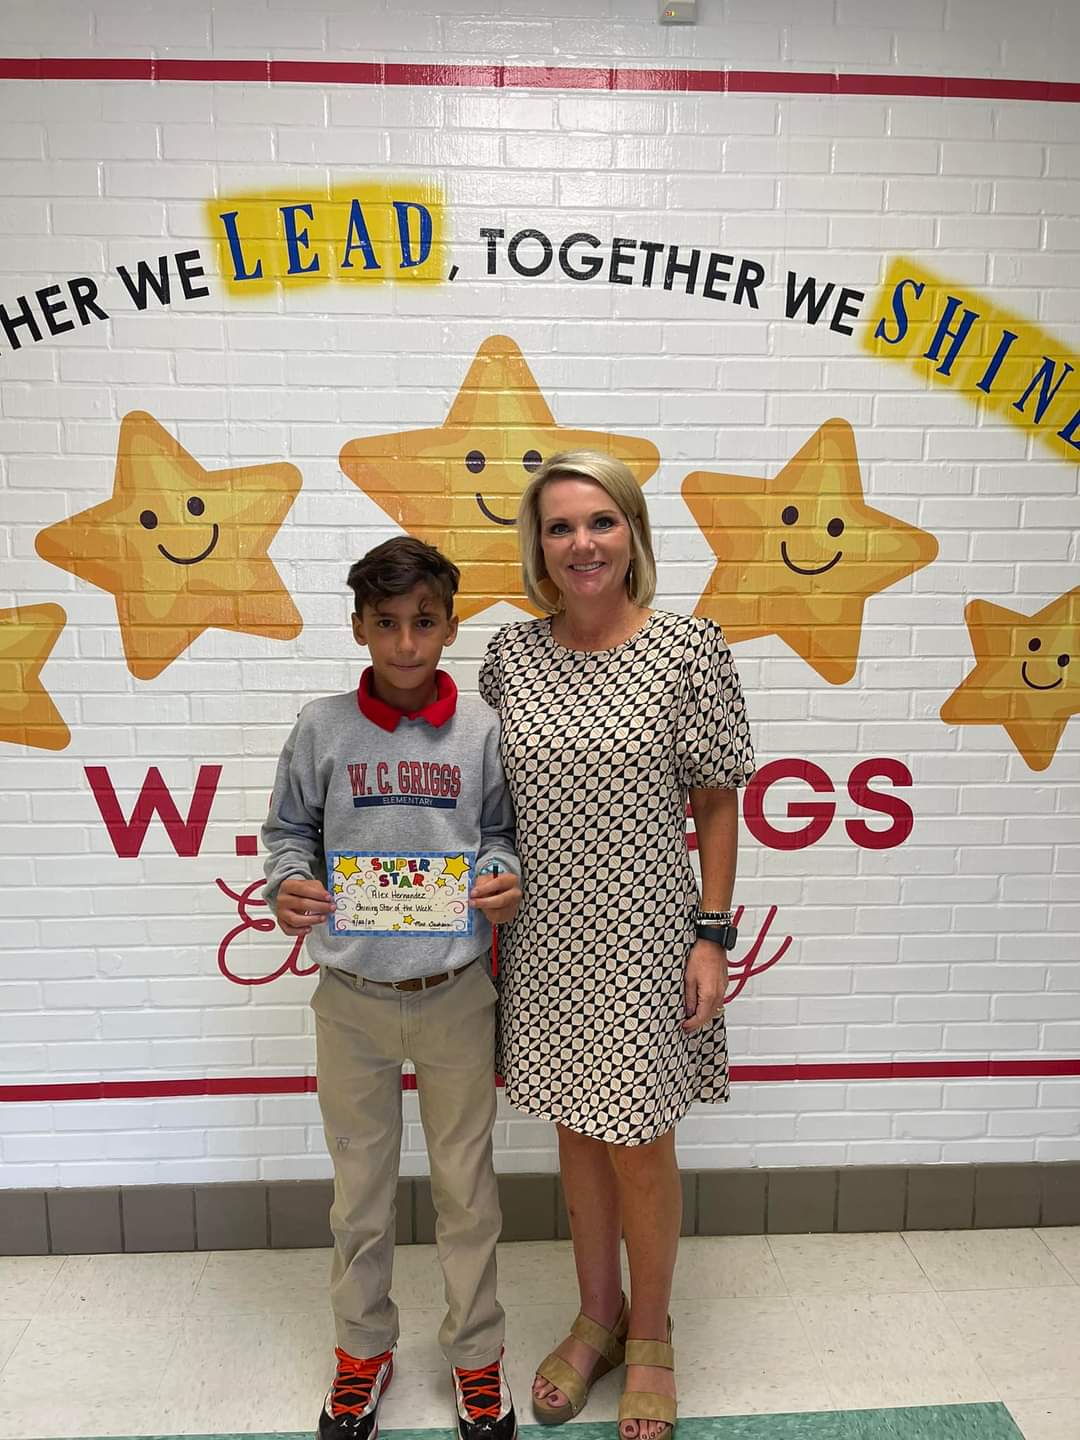 Pictured: Alex Hernandez and Mrs. Tashbin. Alex was selected as this week's (9/22/23) "Shining Star of the Week!"